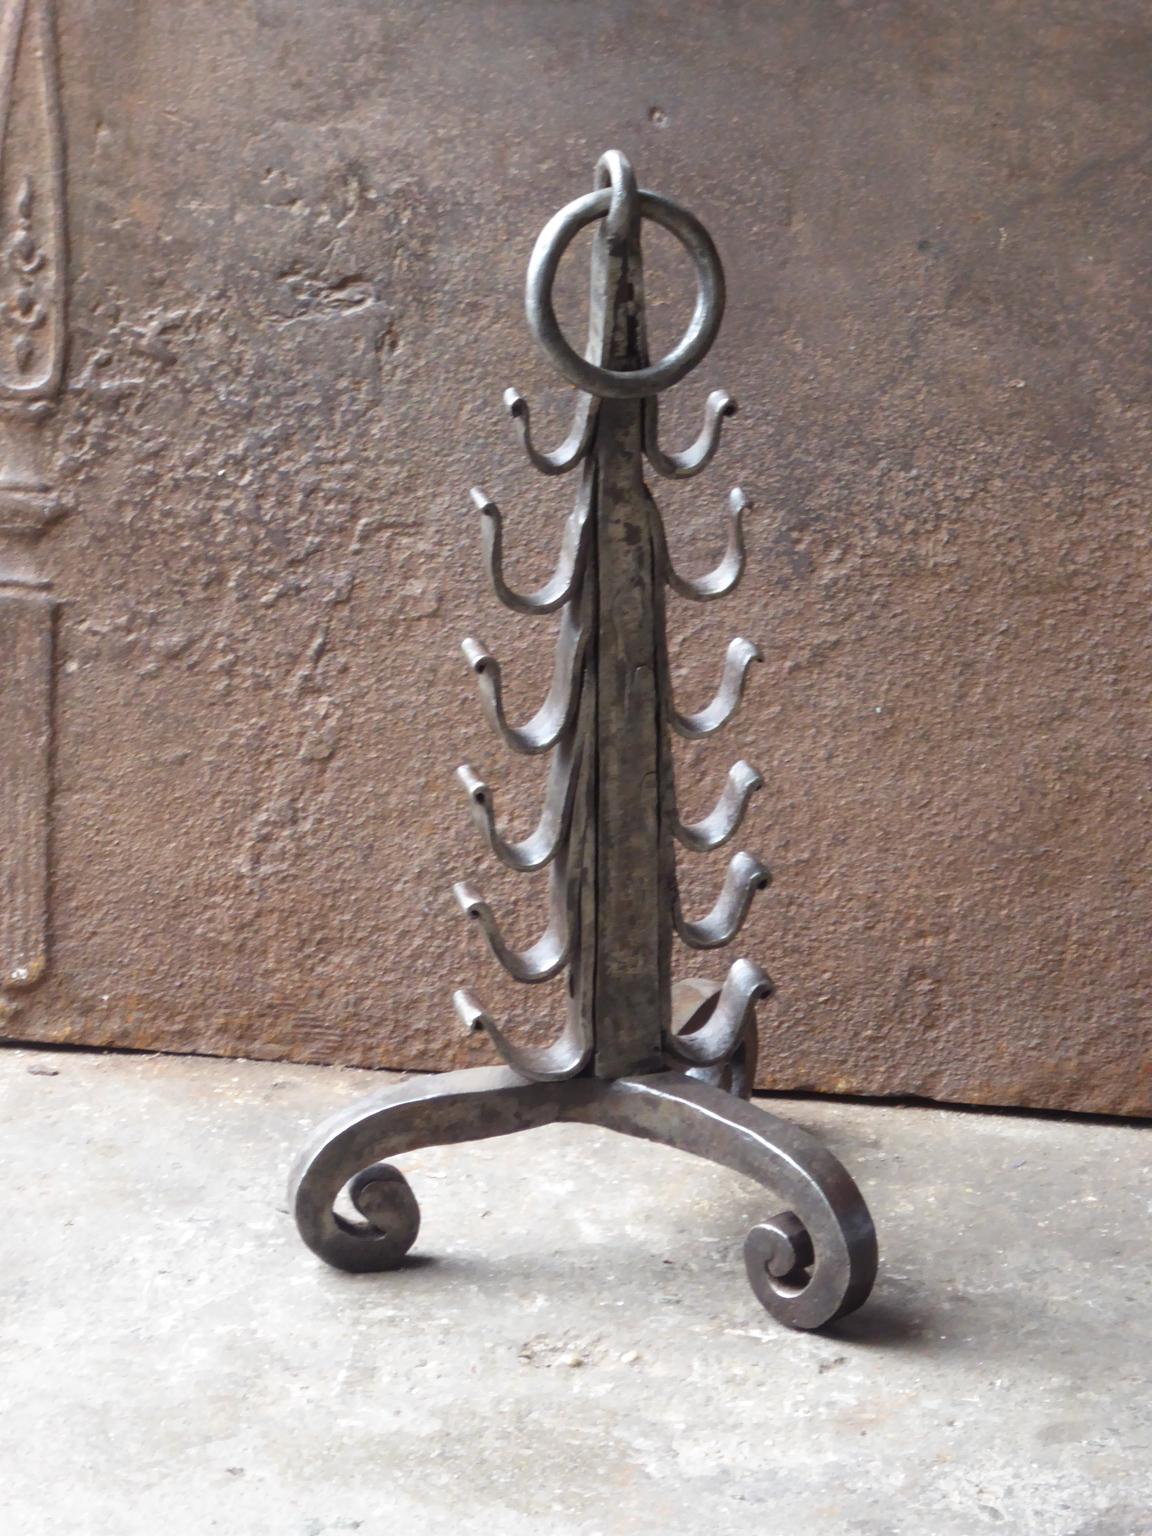 Beautiful 18th century French Louis XV period stand for a roasting jack. The stand is hand forged and made of wrought iron. The condition is good.







